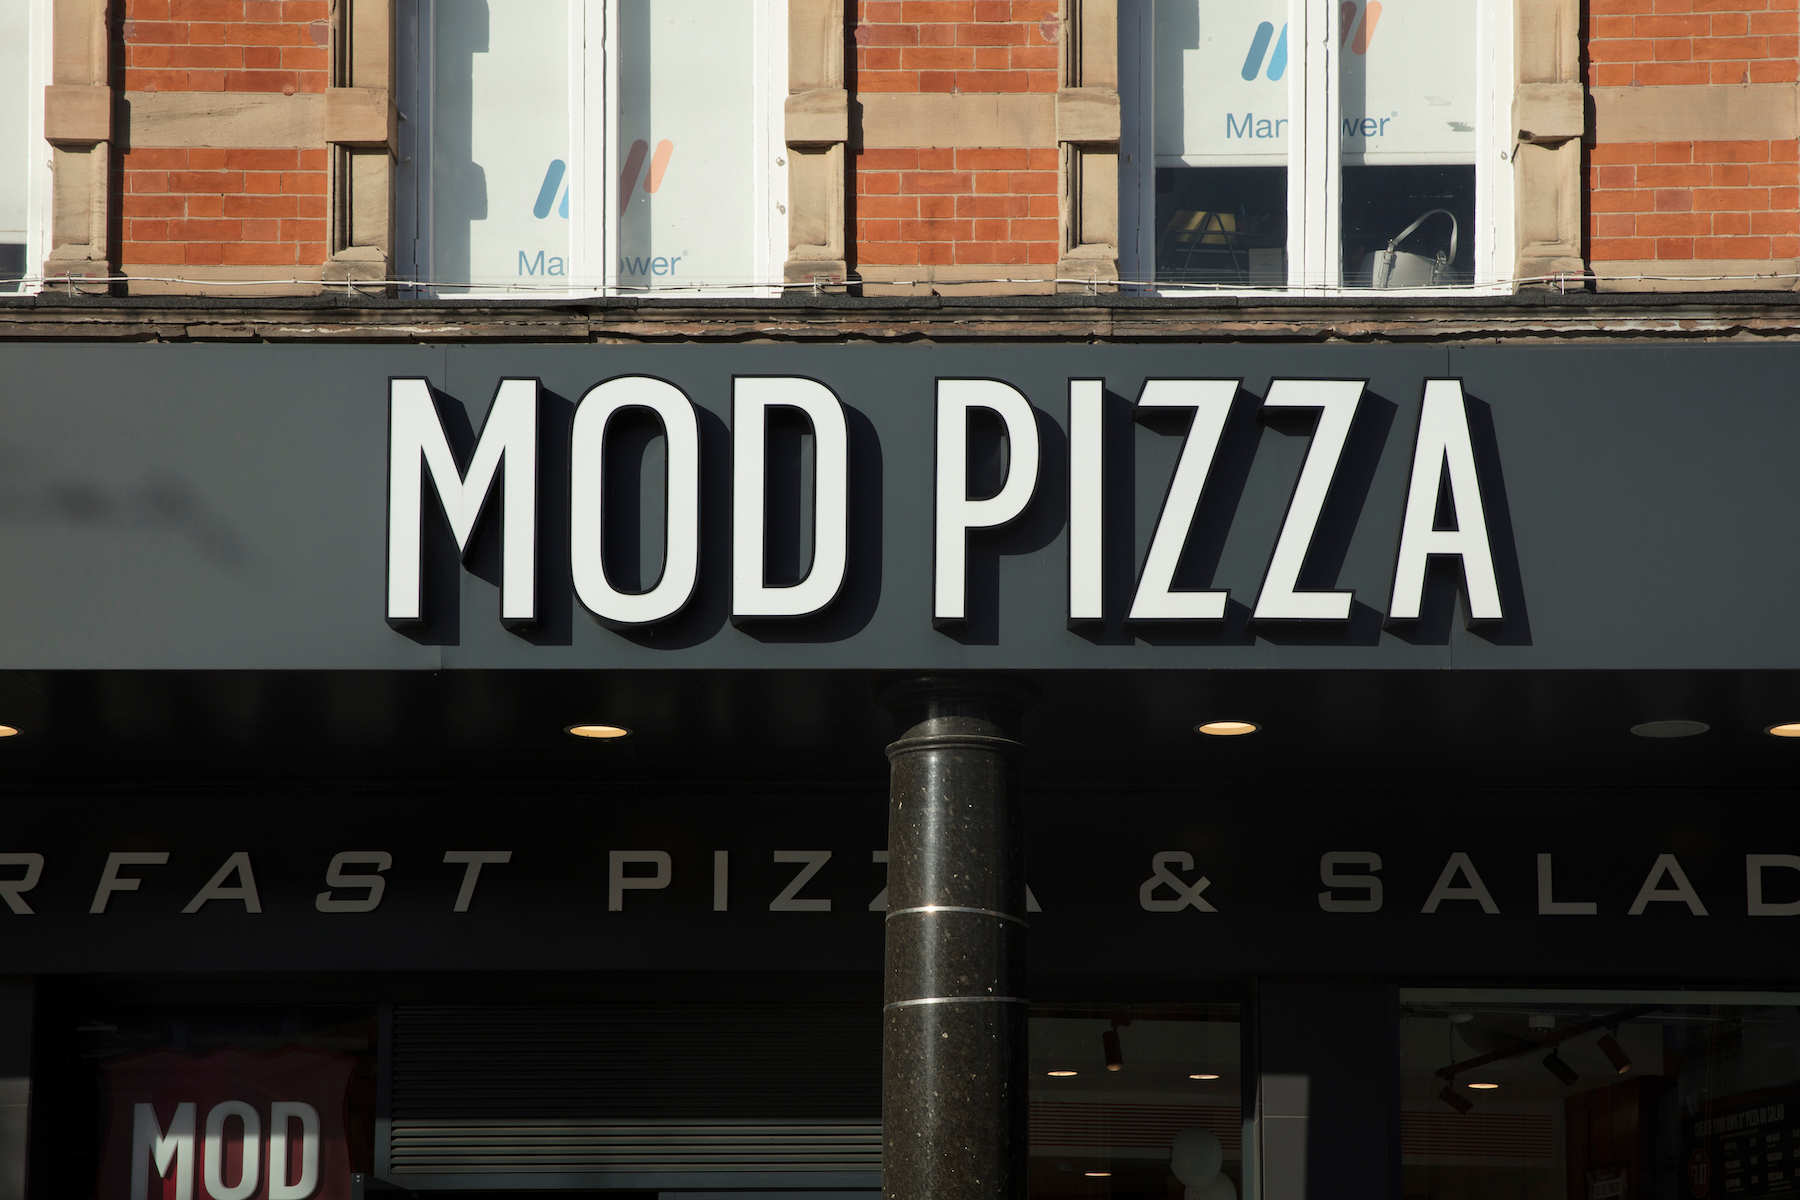 Here Are The 11 Best Pizza Franchises To OwnMod Pizza franchise, best pizza franchises